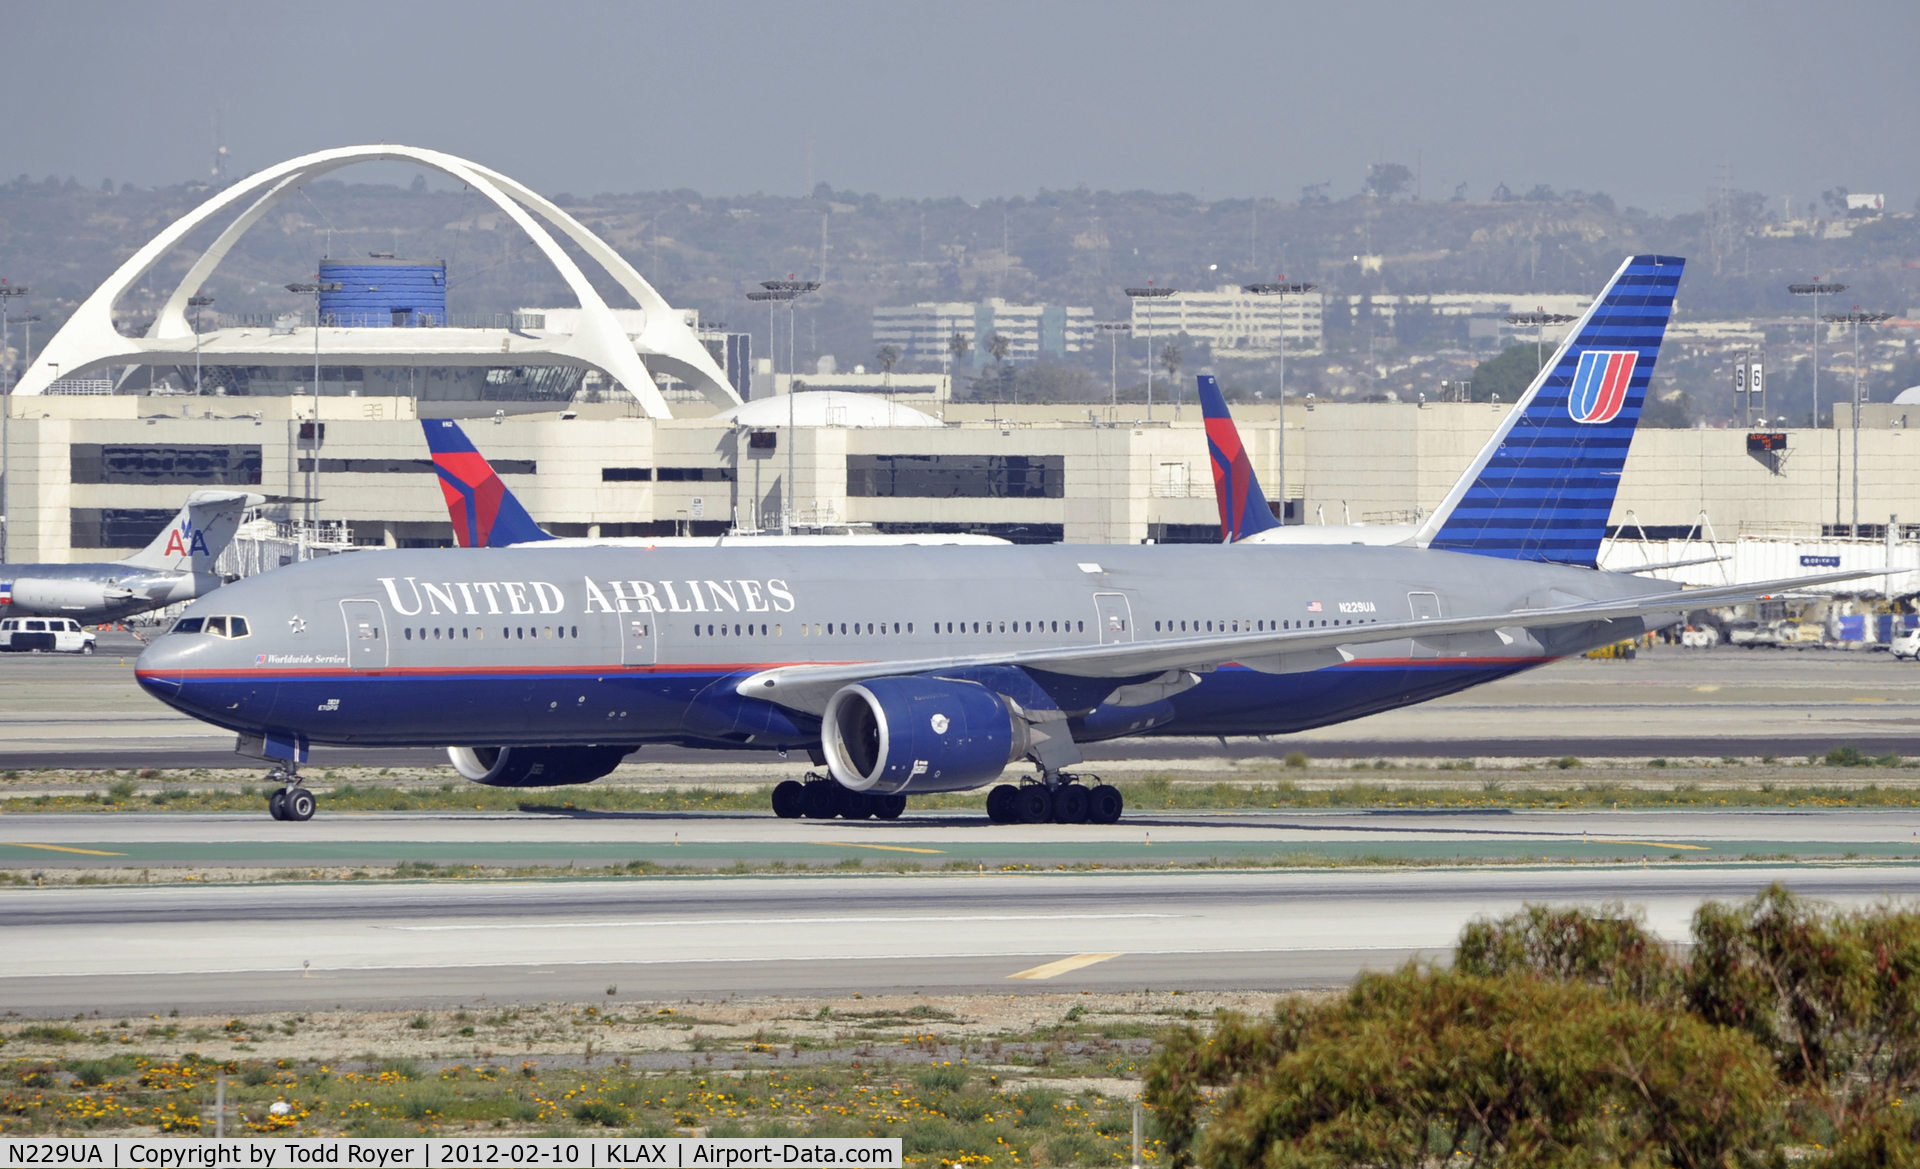 N229UA, 2002 Boeing 777-222 C/N 30557, Just arrived at LAX on 25L